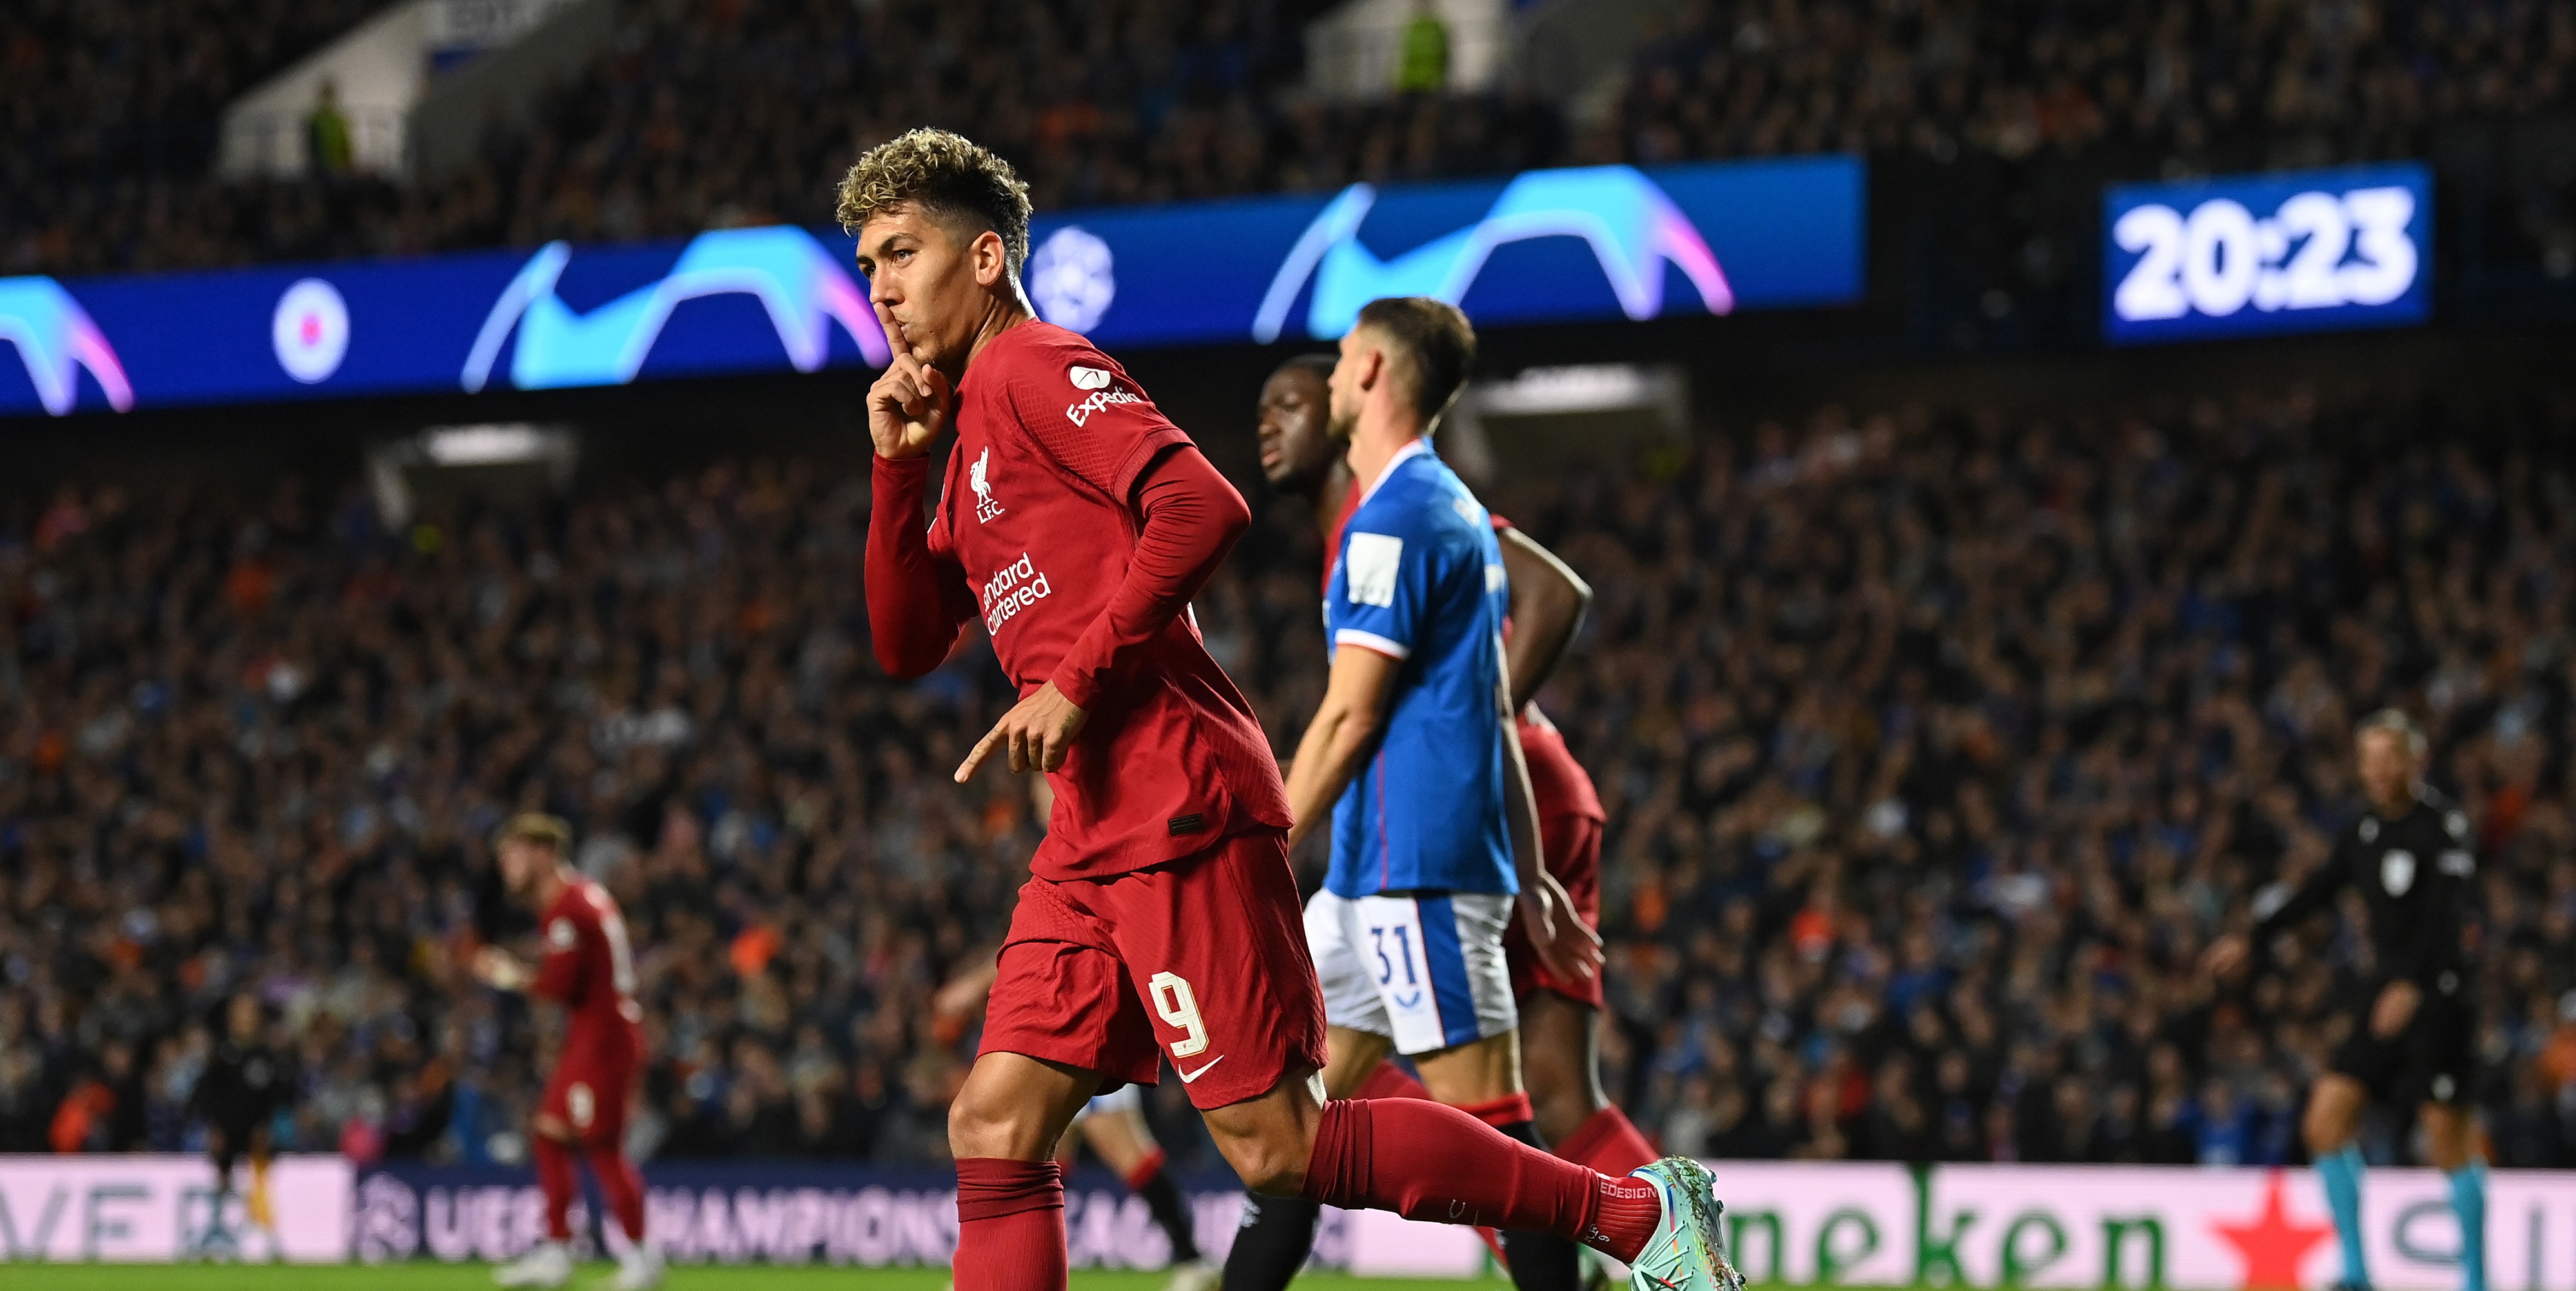 Rangers fan calls for Bobby Firmino to become player manager